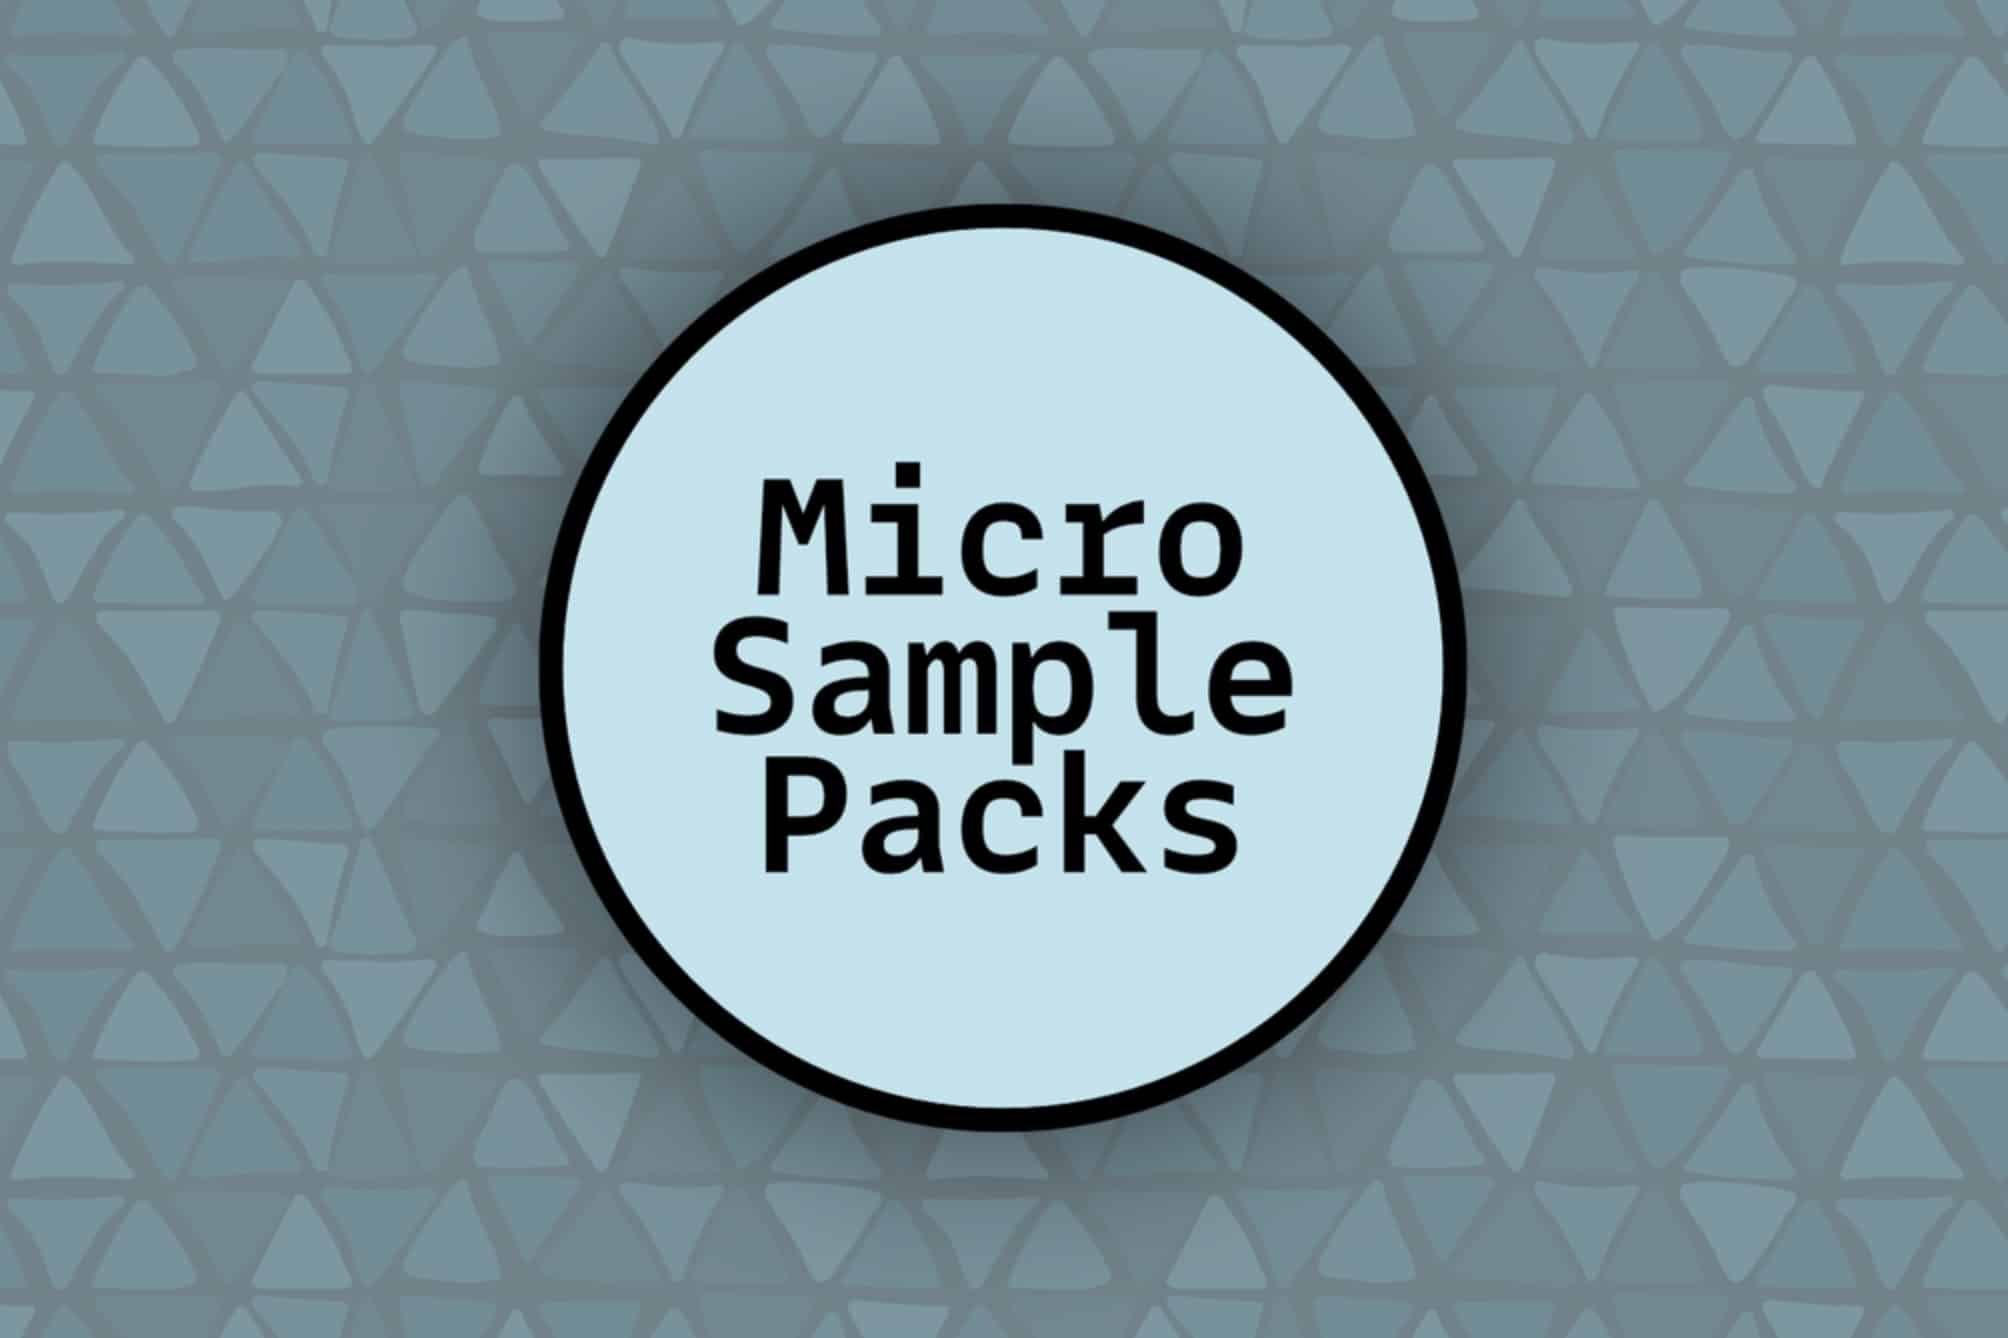 Micro Sample Pack Paper cutter sounds